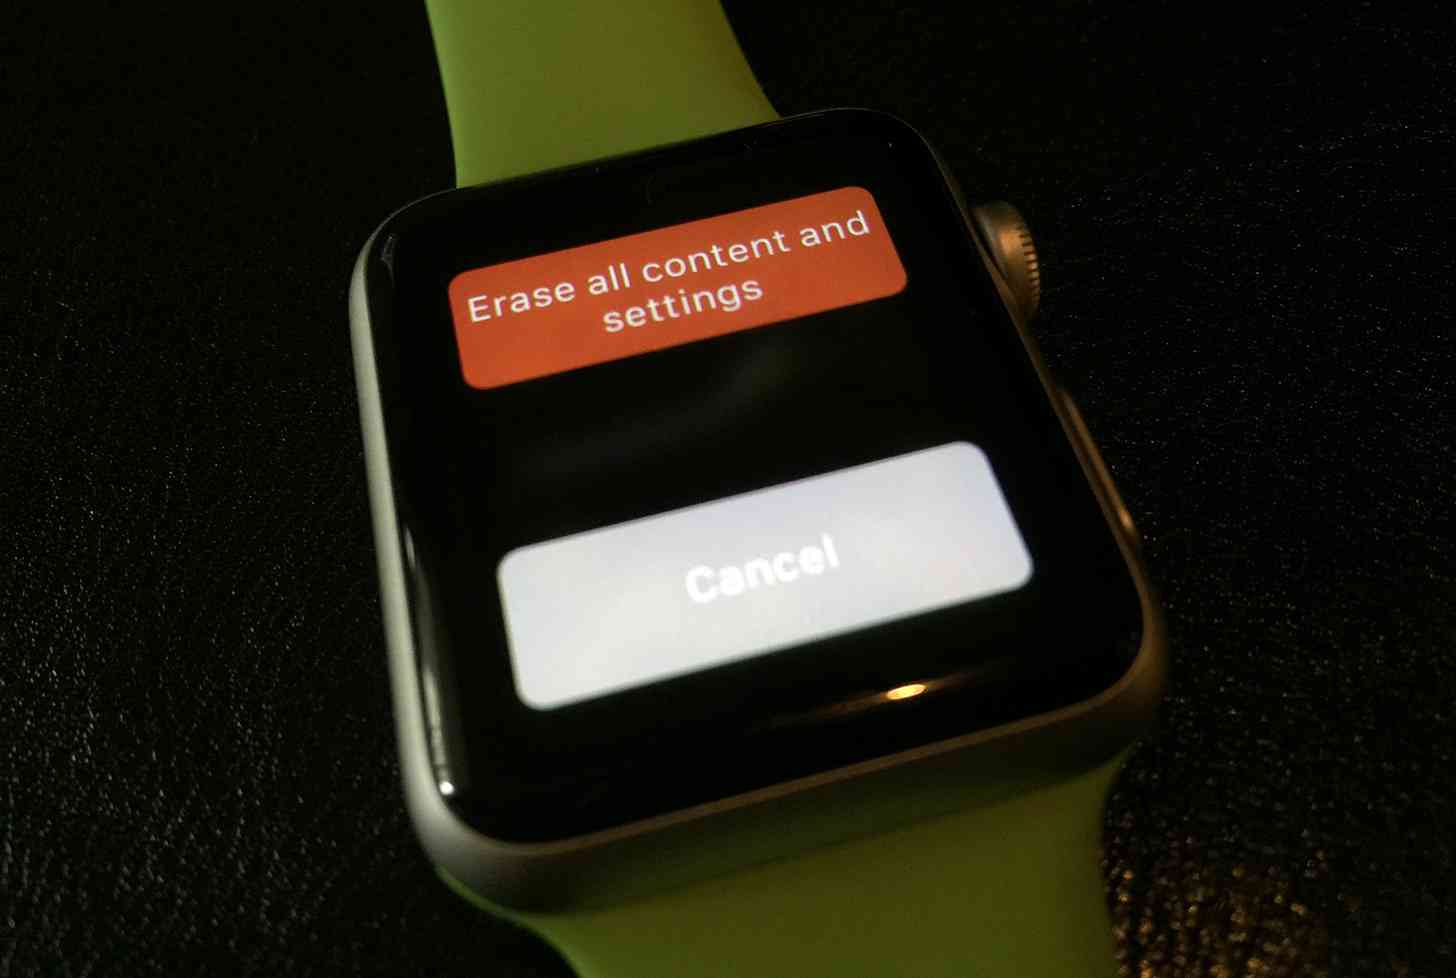 Apple Watch Erase all content and settings